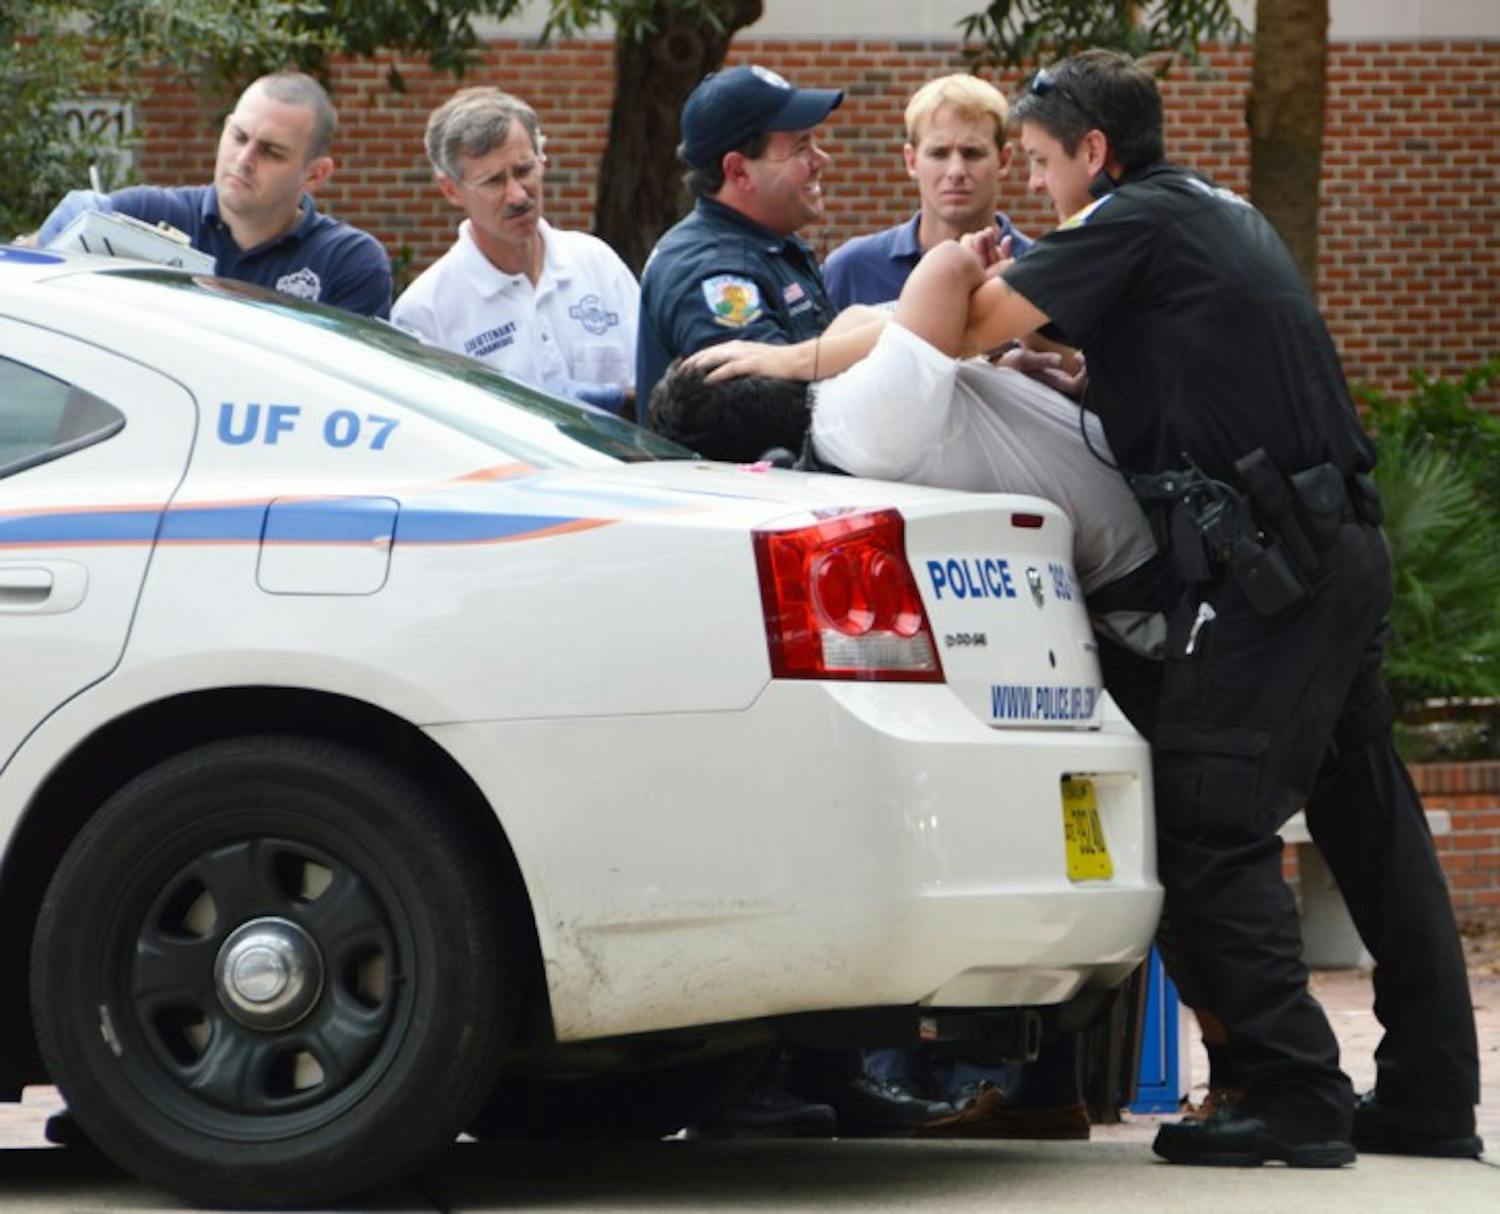 University Police officers arrest Alvaro Buenfil, 19, outside the Gator Corner Dining Center on Thursday. Police said Buenfil was under the influence of drugs at the time of his arrest.